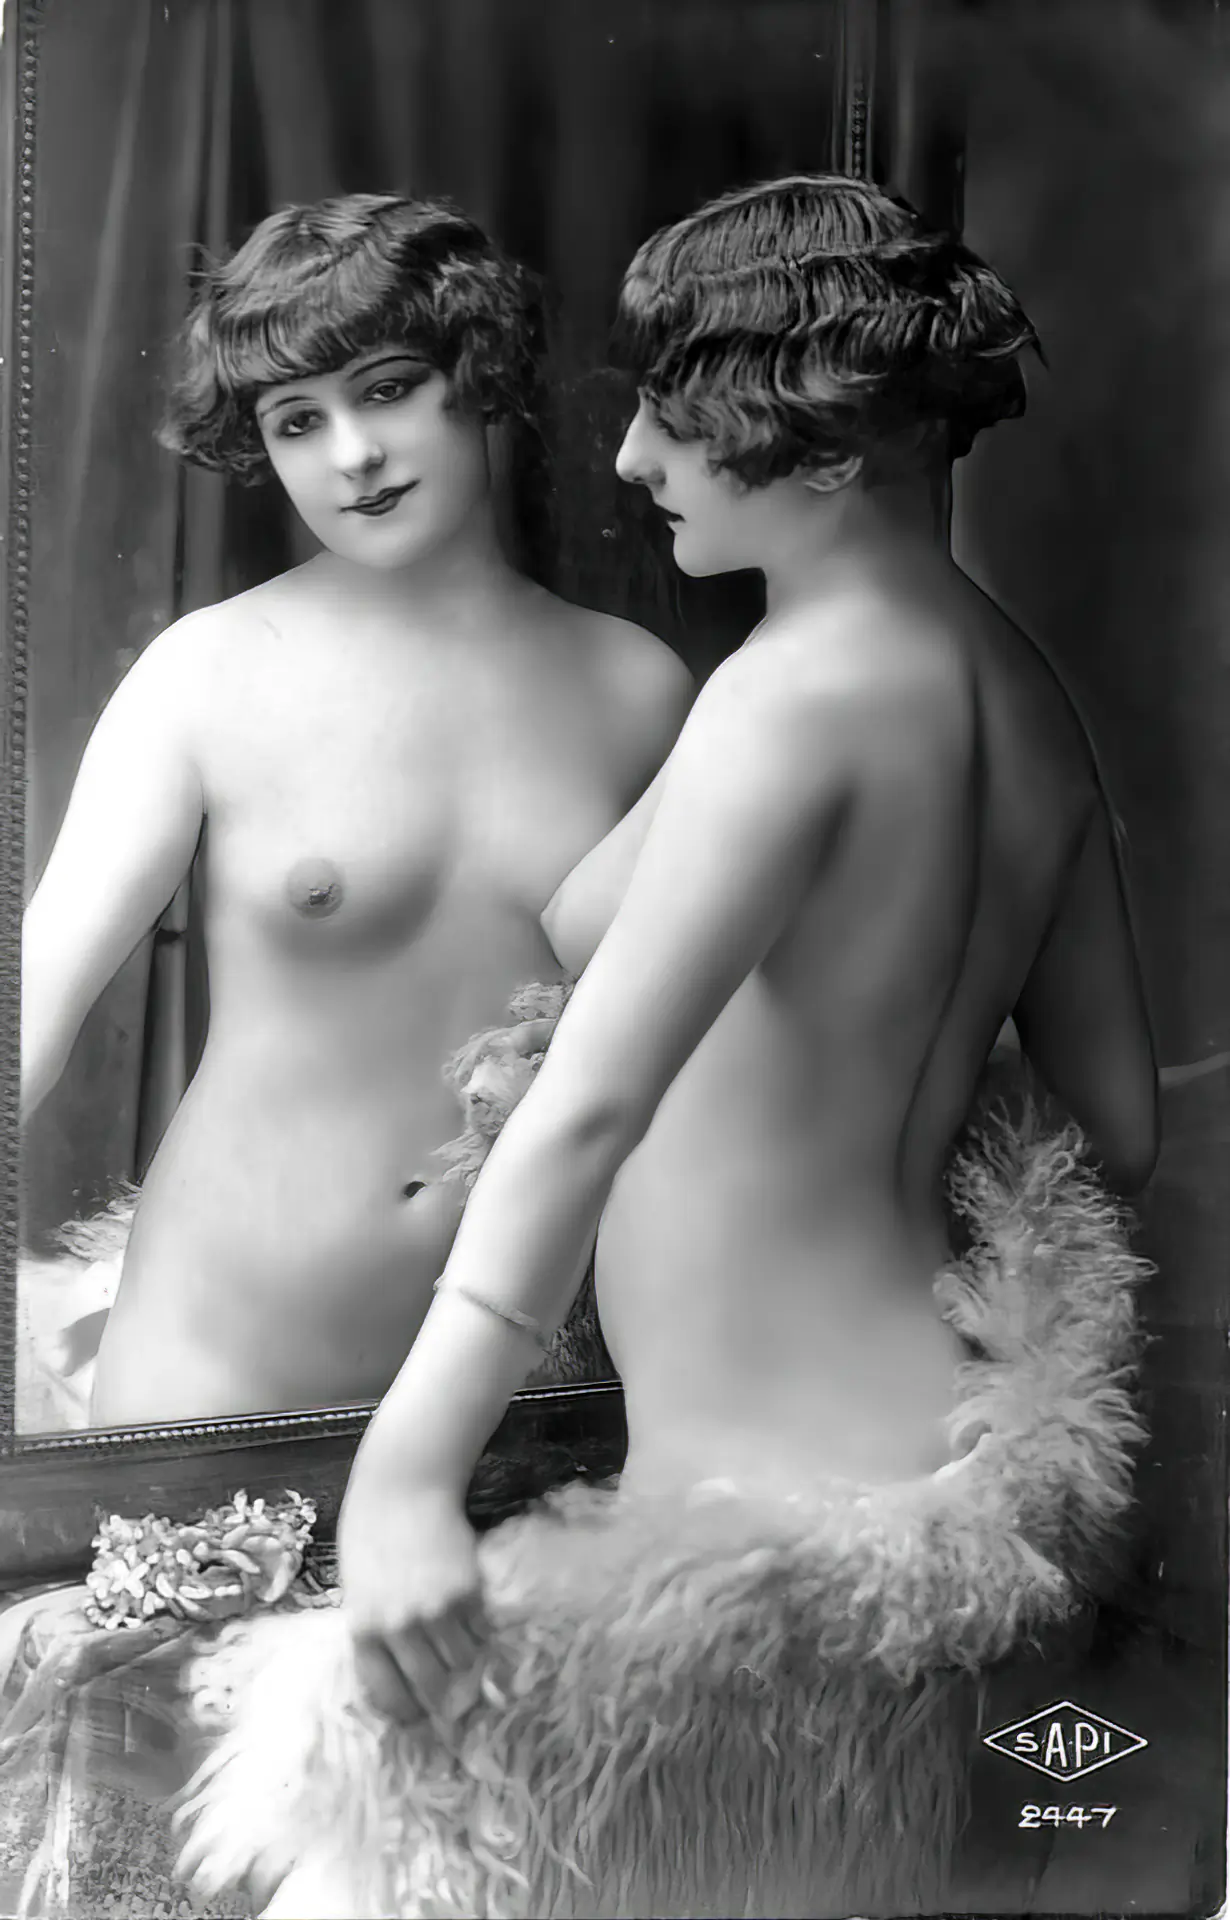 Hot young antique lady poses by the mirror with her small tits